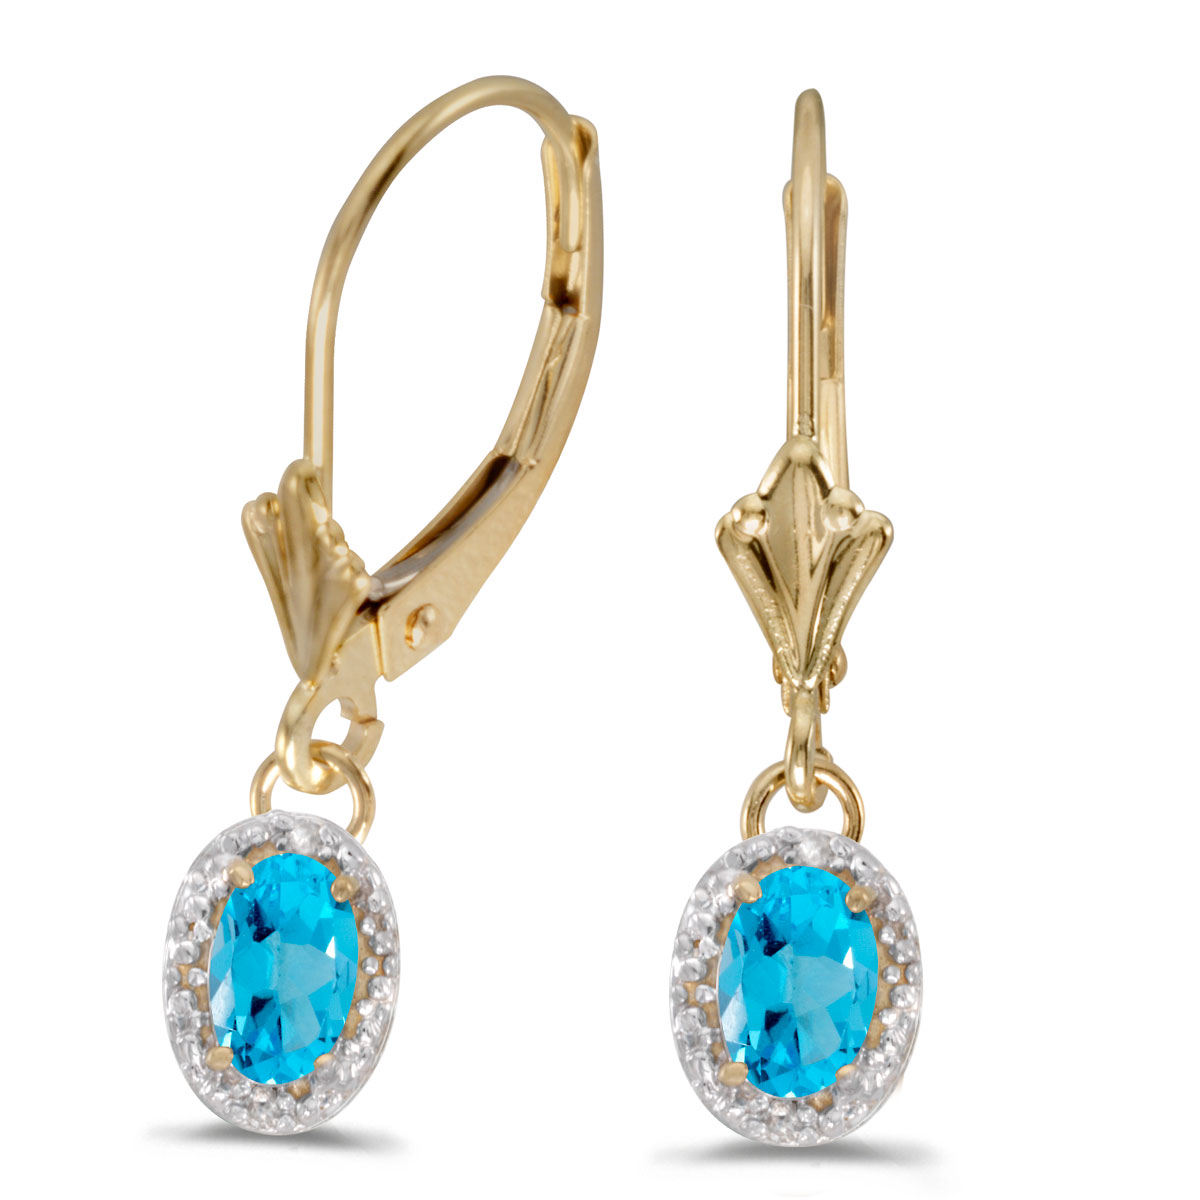 Beautiful 10k yellow gold leverback earrings with sophisticated 6x4 mm blue topaz stones complemented with bright diamonds.